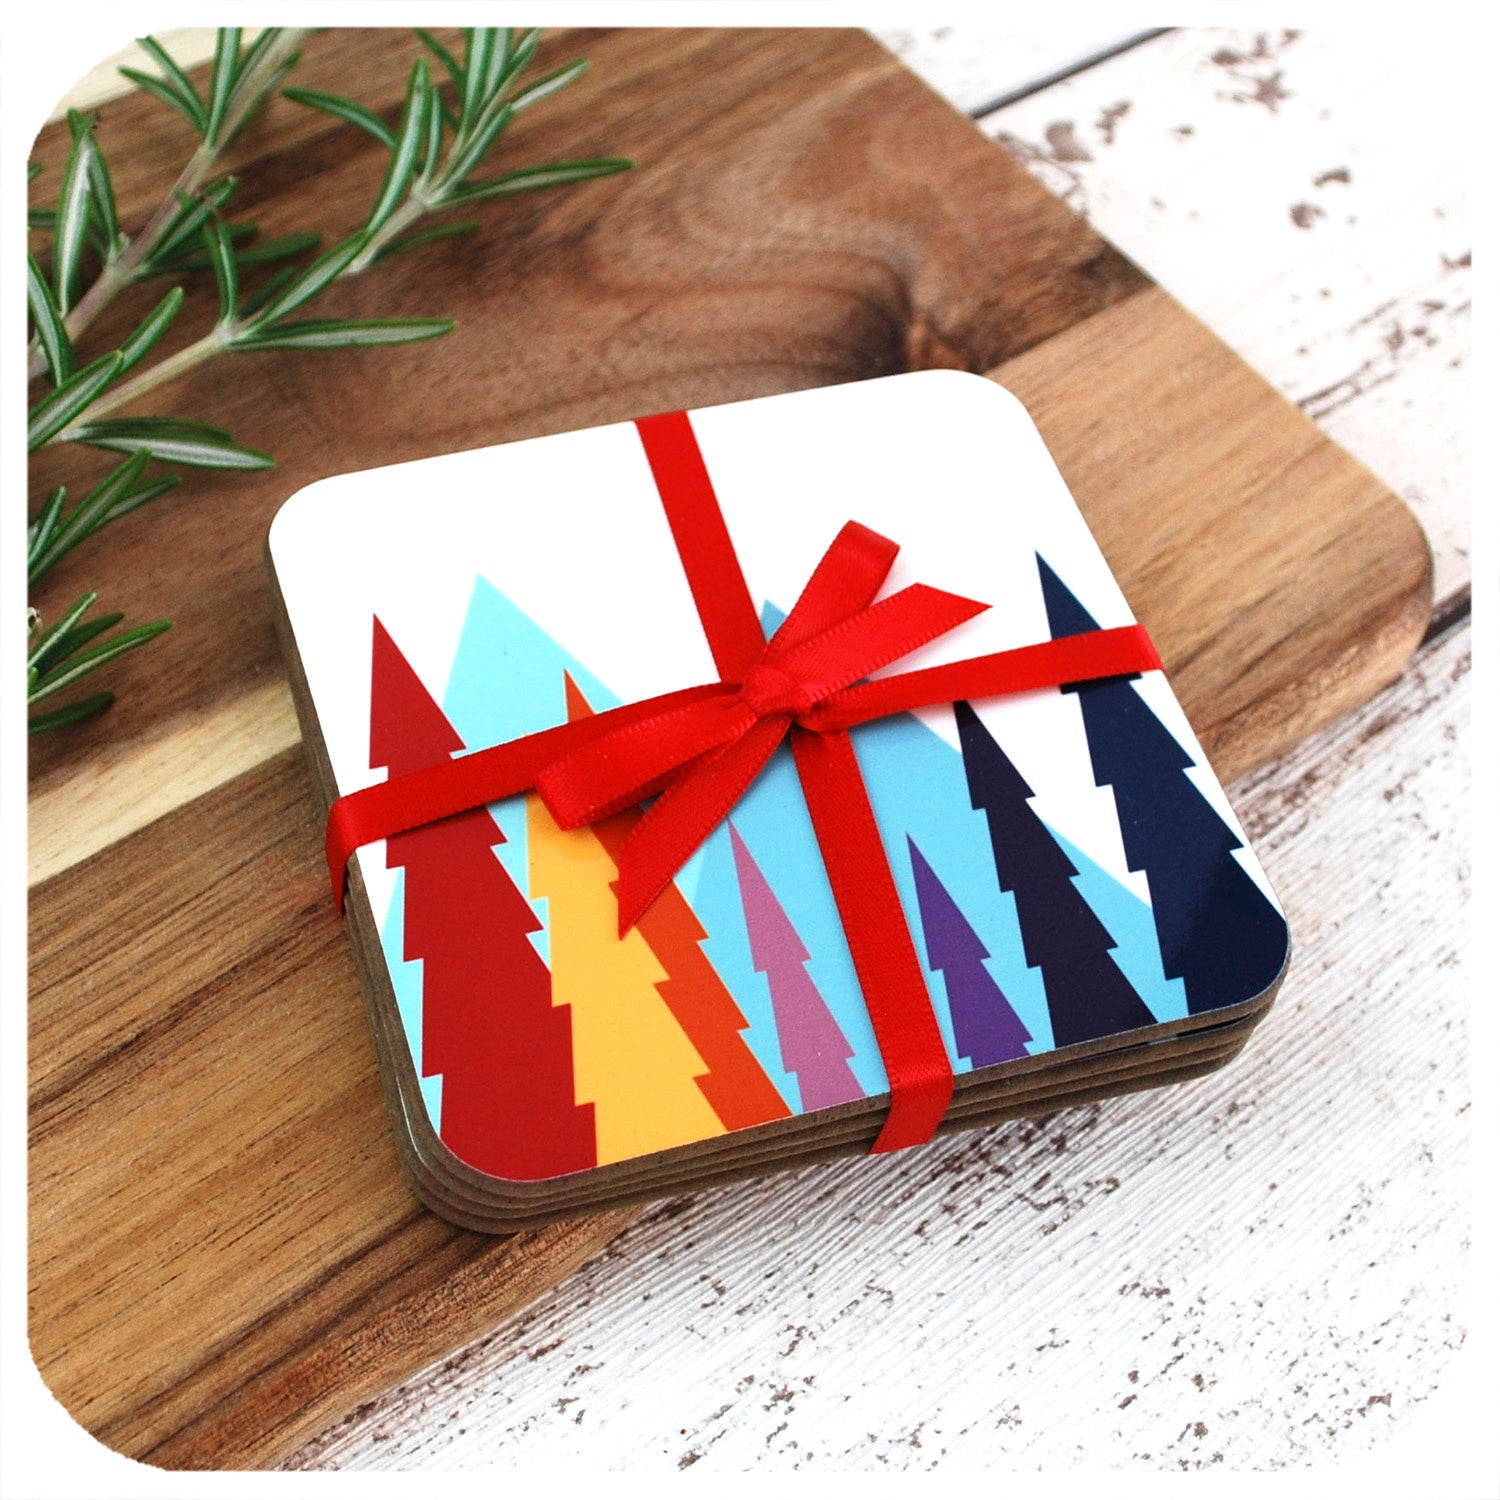 Nordic Trees Coasters, tied in red ribbon, gift wrapped as standard | The Inkabilly Emporium